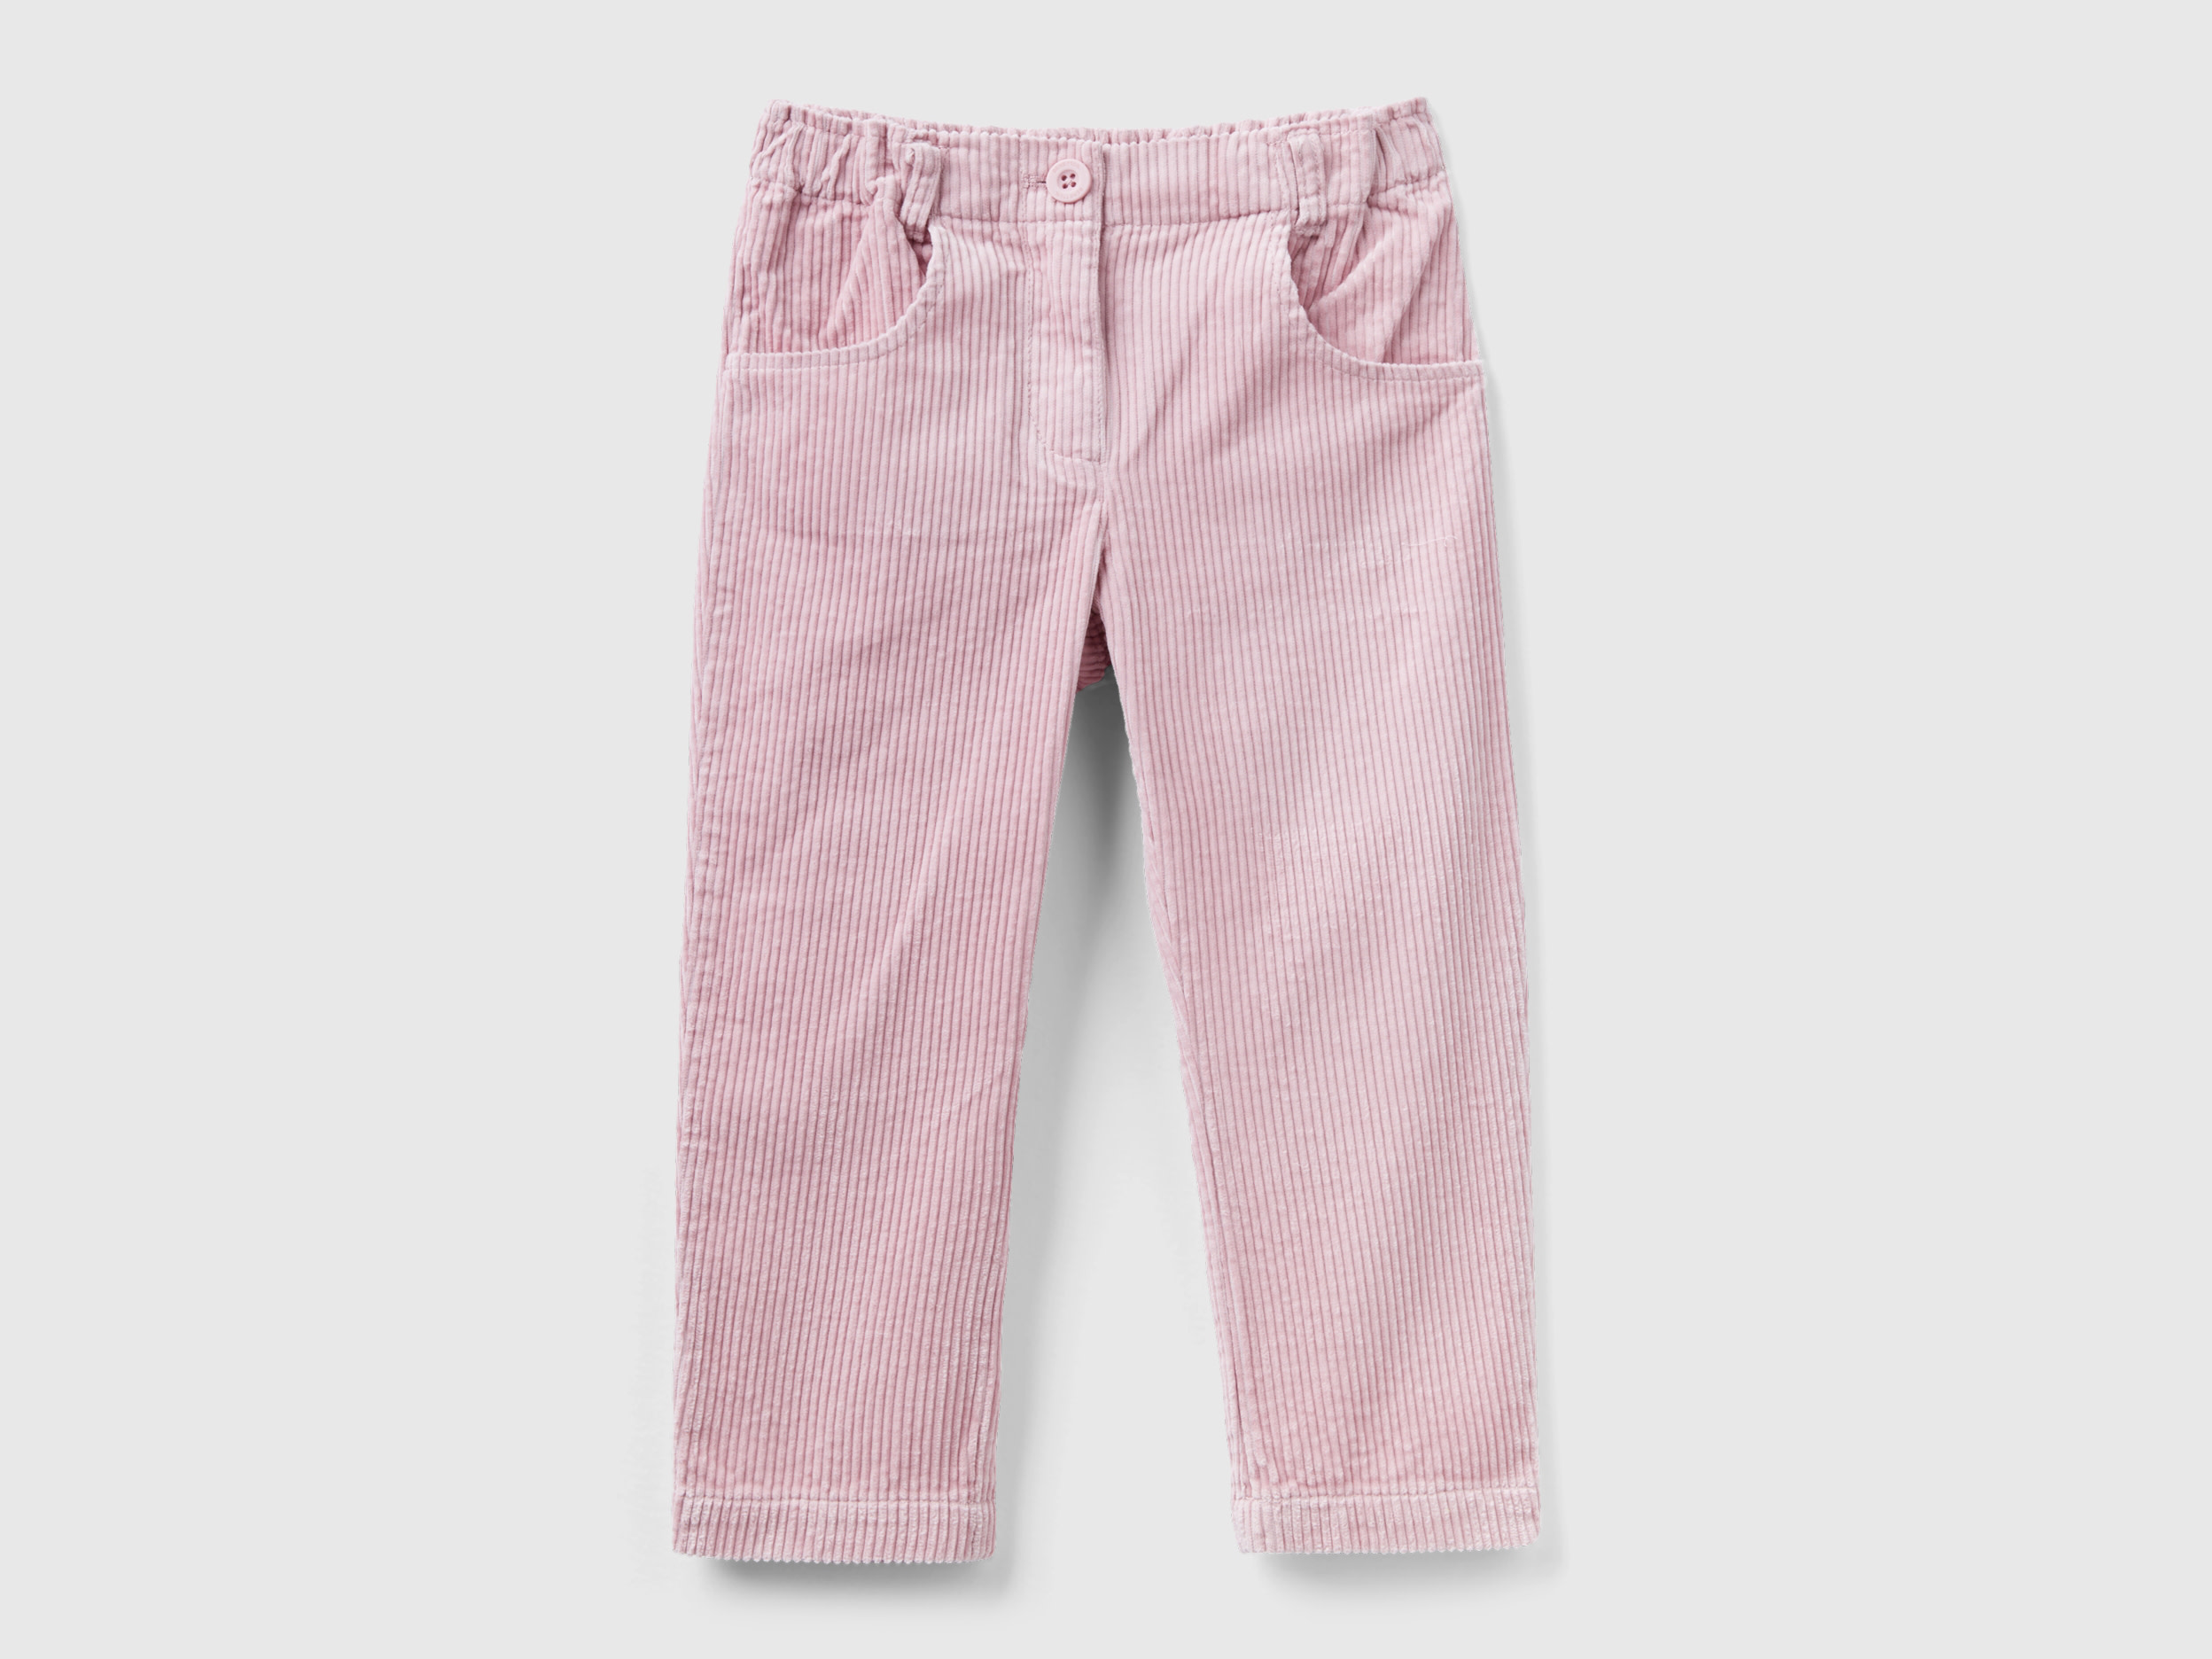 Benetton, Corduroy Trousers With Elastic, size 4-5, Pink, Kids